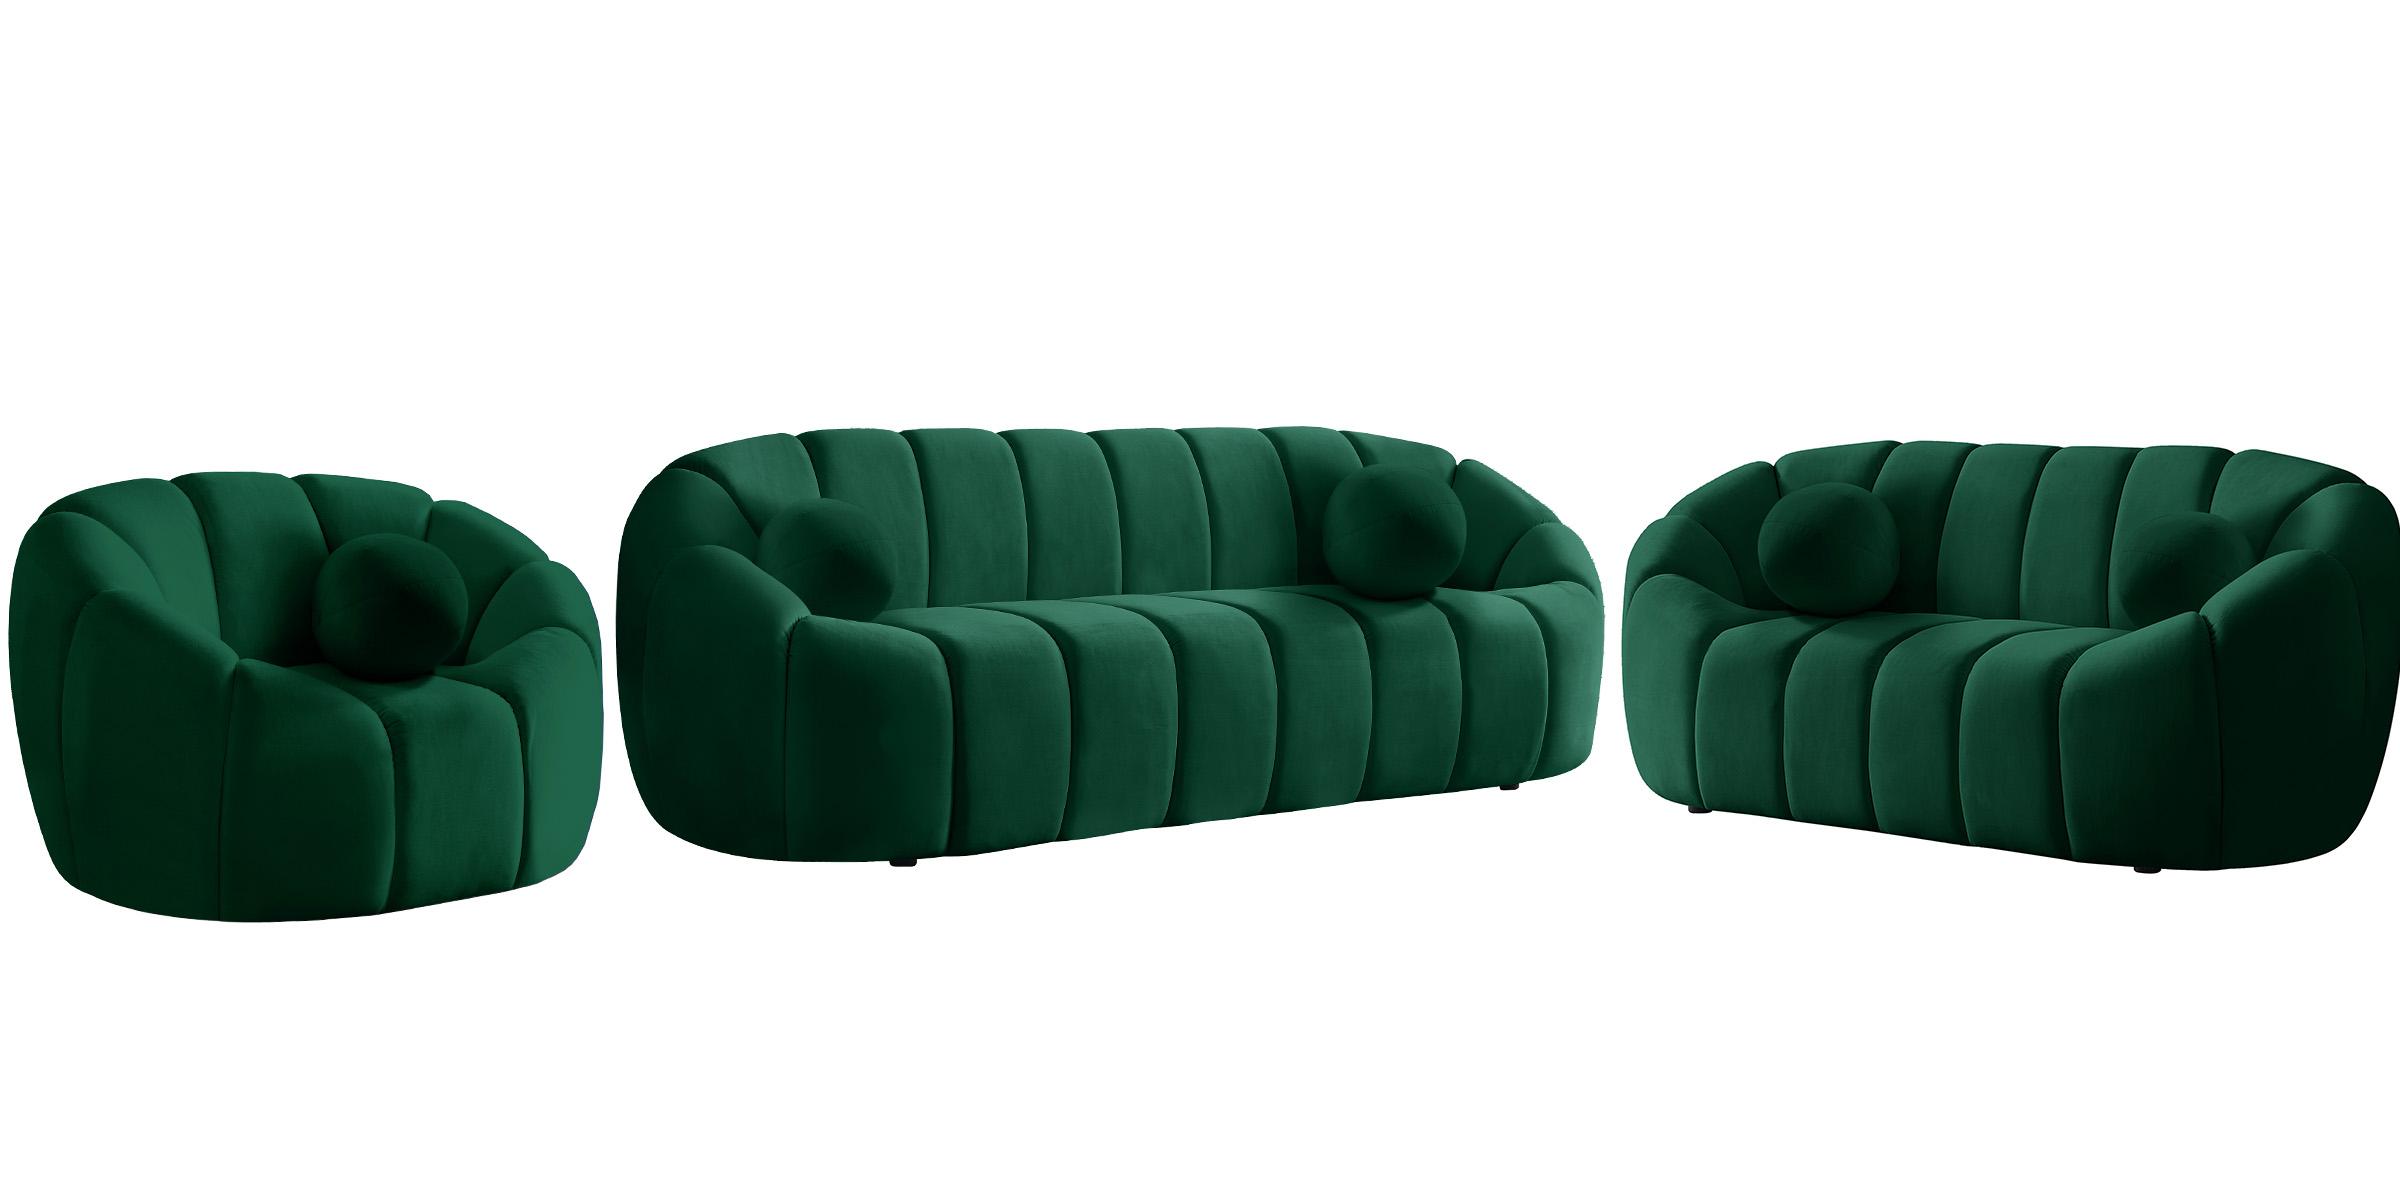 

    
613Green-C Meridian Furniture Arm Chairs
